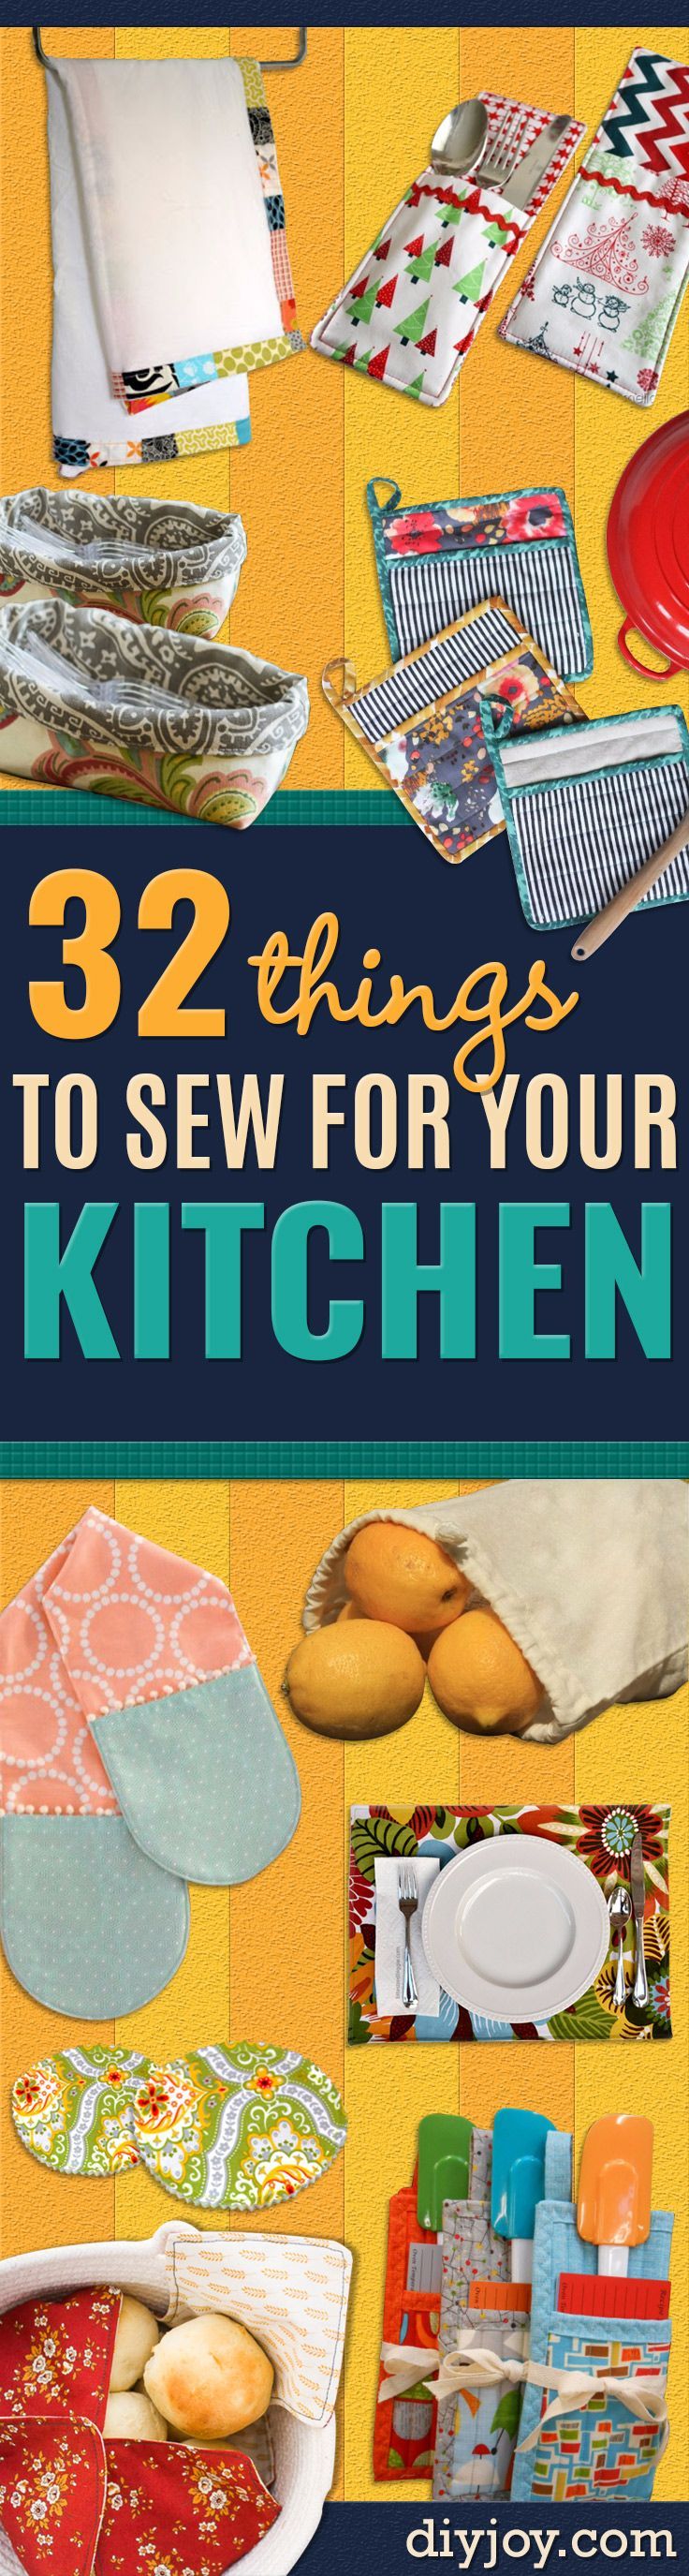 DIY Sewing Projects for the Kitchen – Easy Sewing Tutorials and Patterns for Towels, napkinds, aprons and cool Christmas gifts for